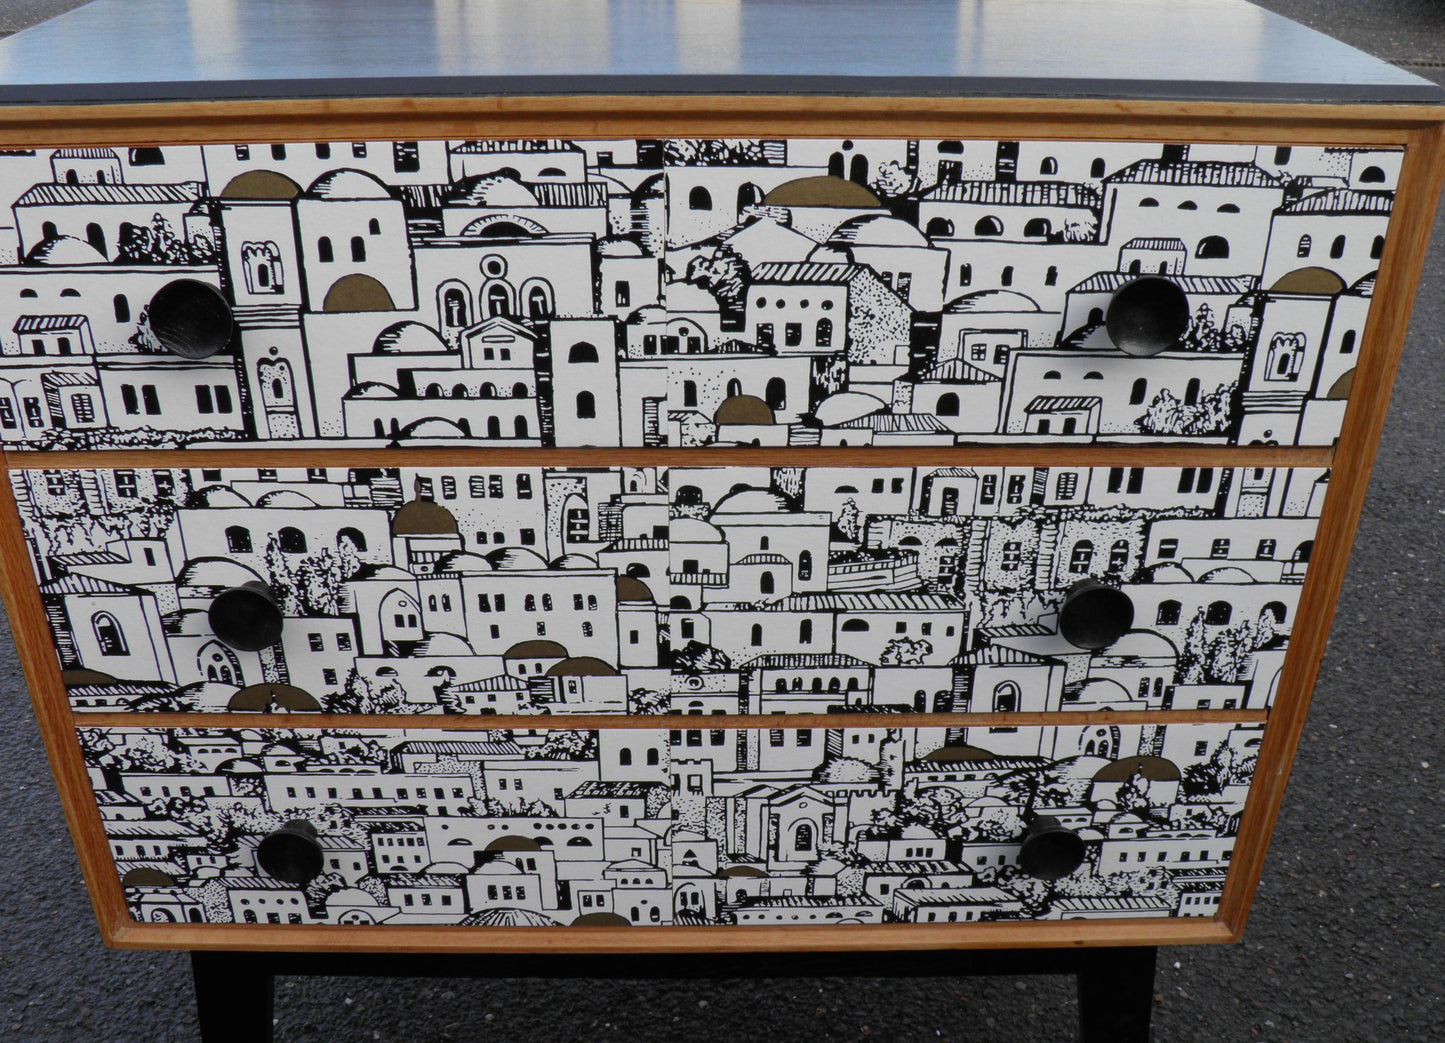 Fabulous Fornasetti Inspired Vintage Retro Chest By Meredew